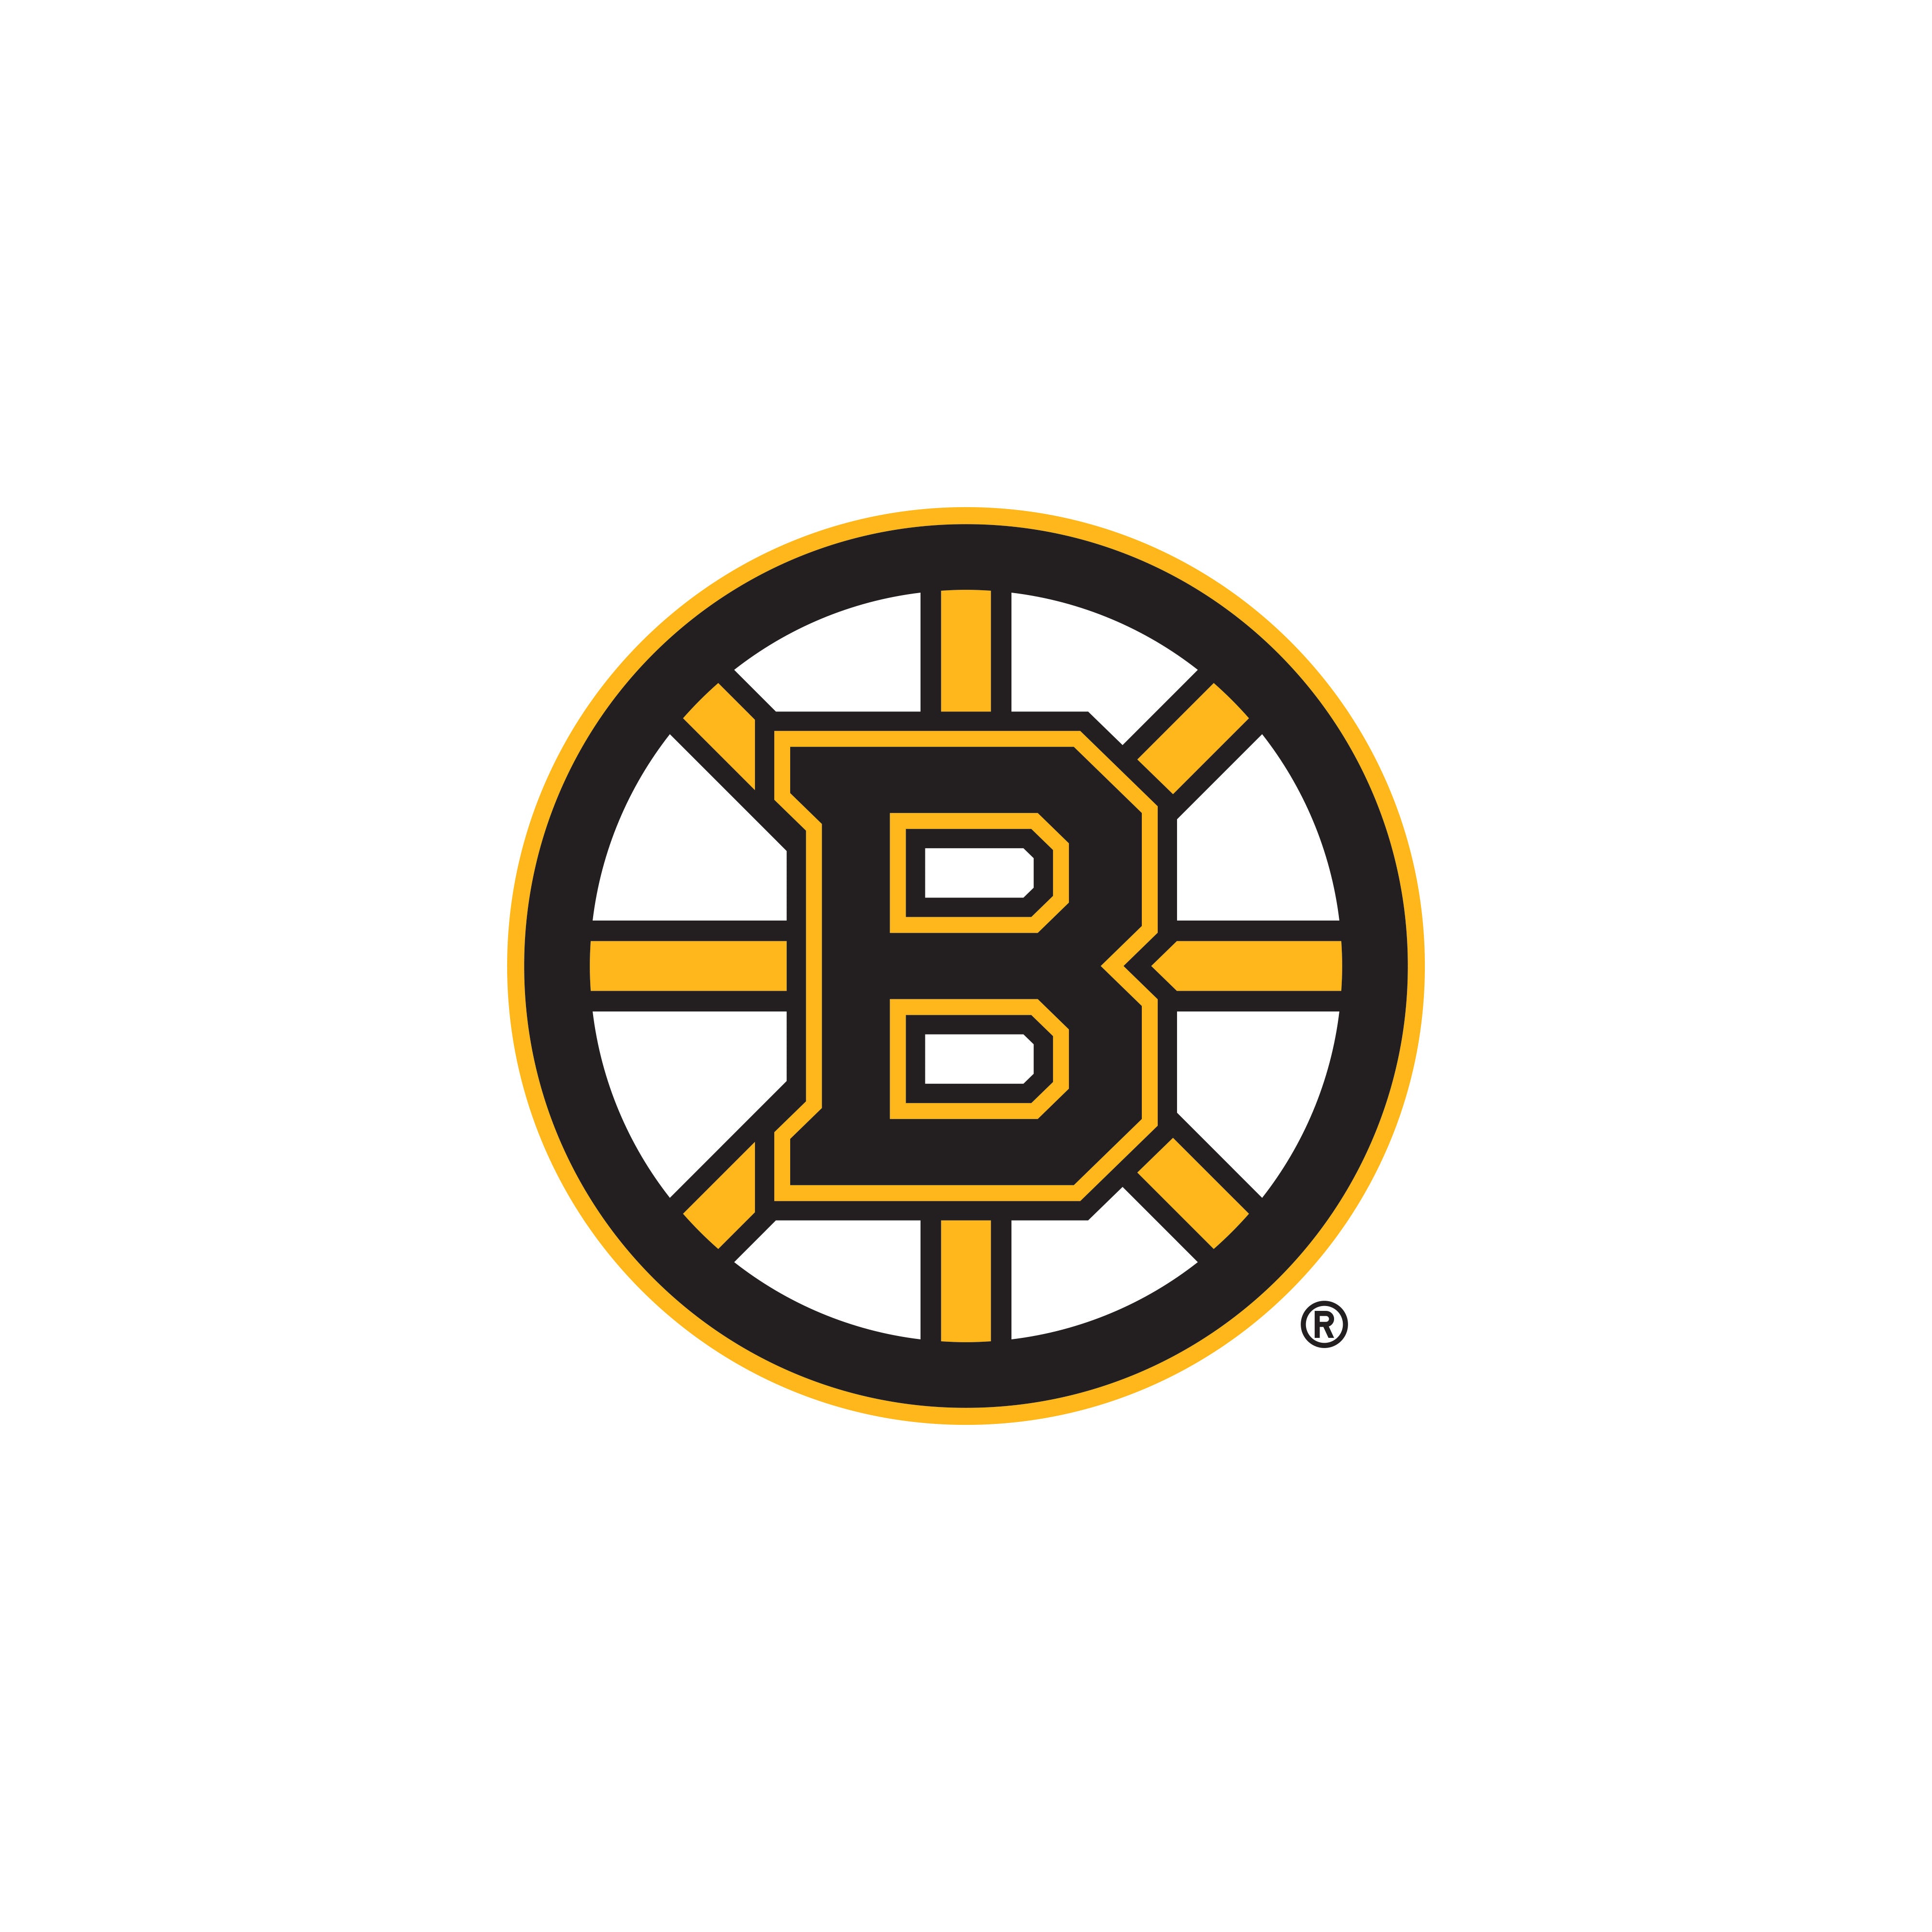 The collection is complete : r/BostonBruins